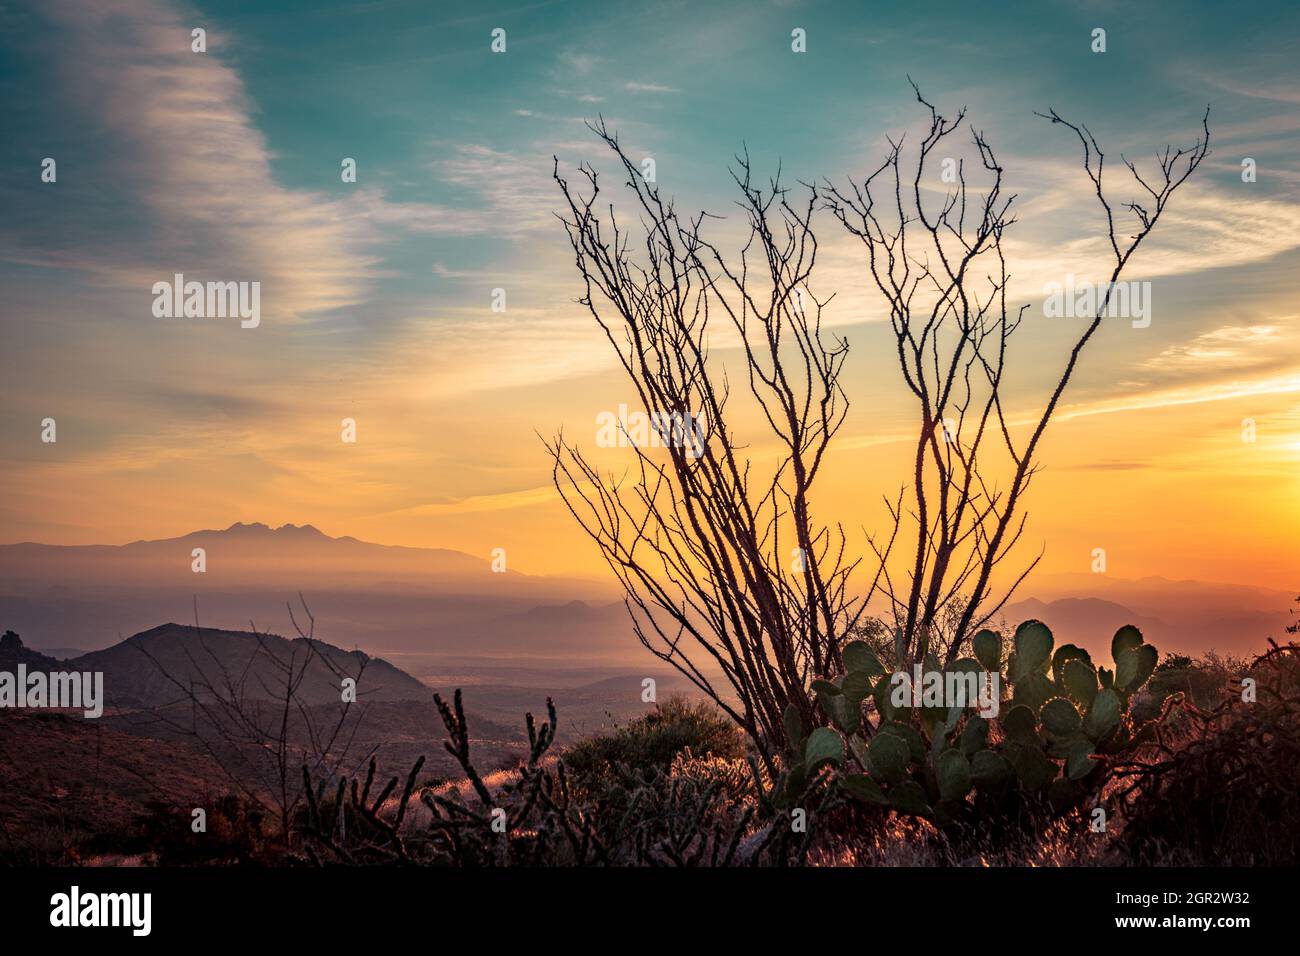 Silhouette Cactus Plant Against Sky During Sunset Stock Photo